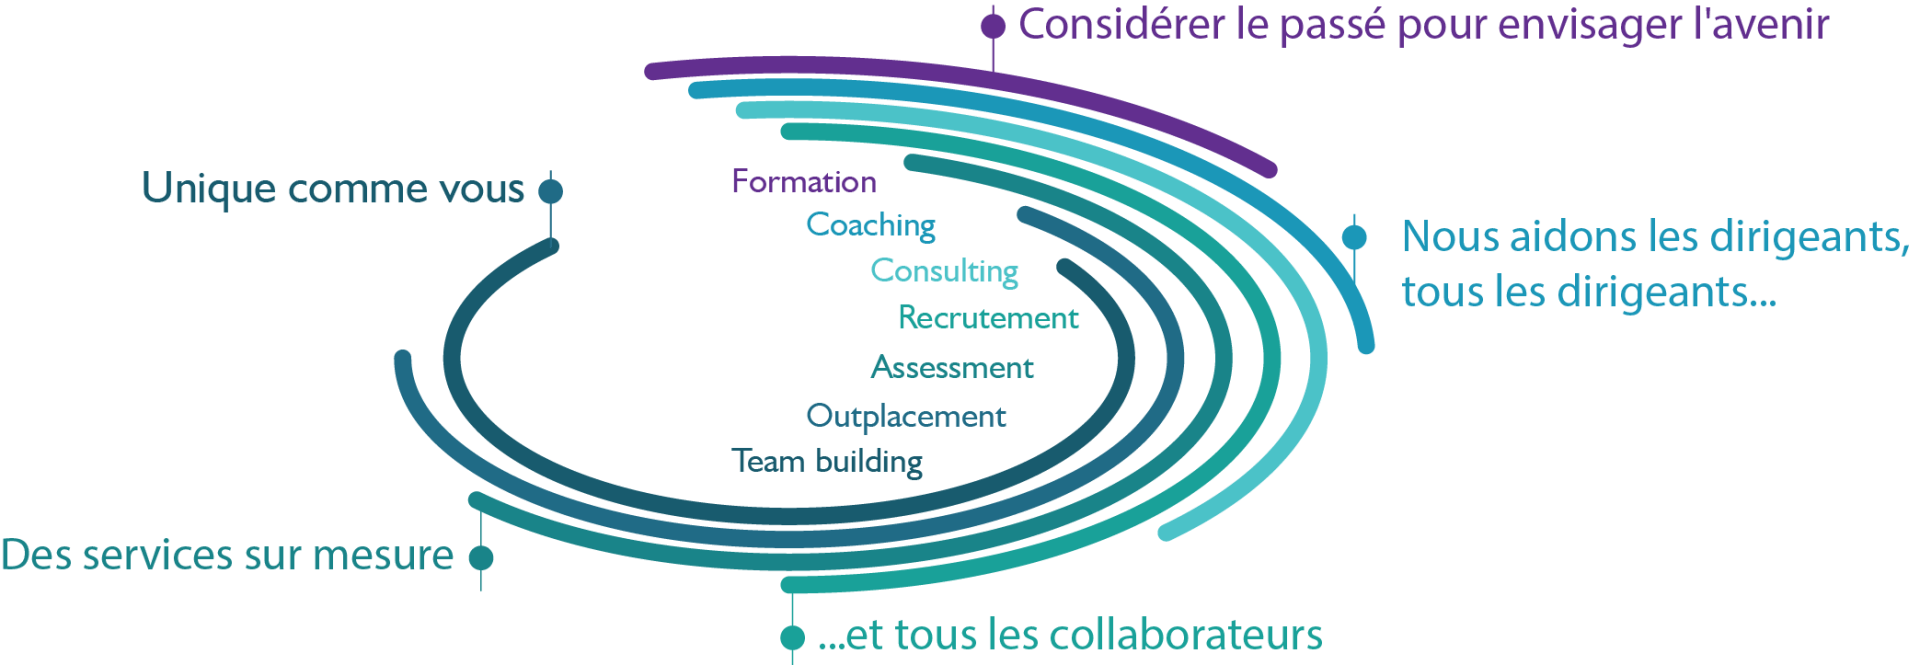 Formation, coaching, consulting et recrutement